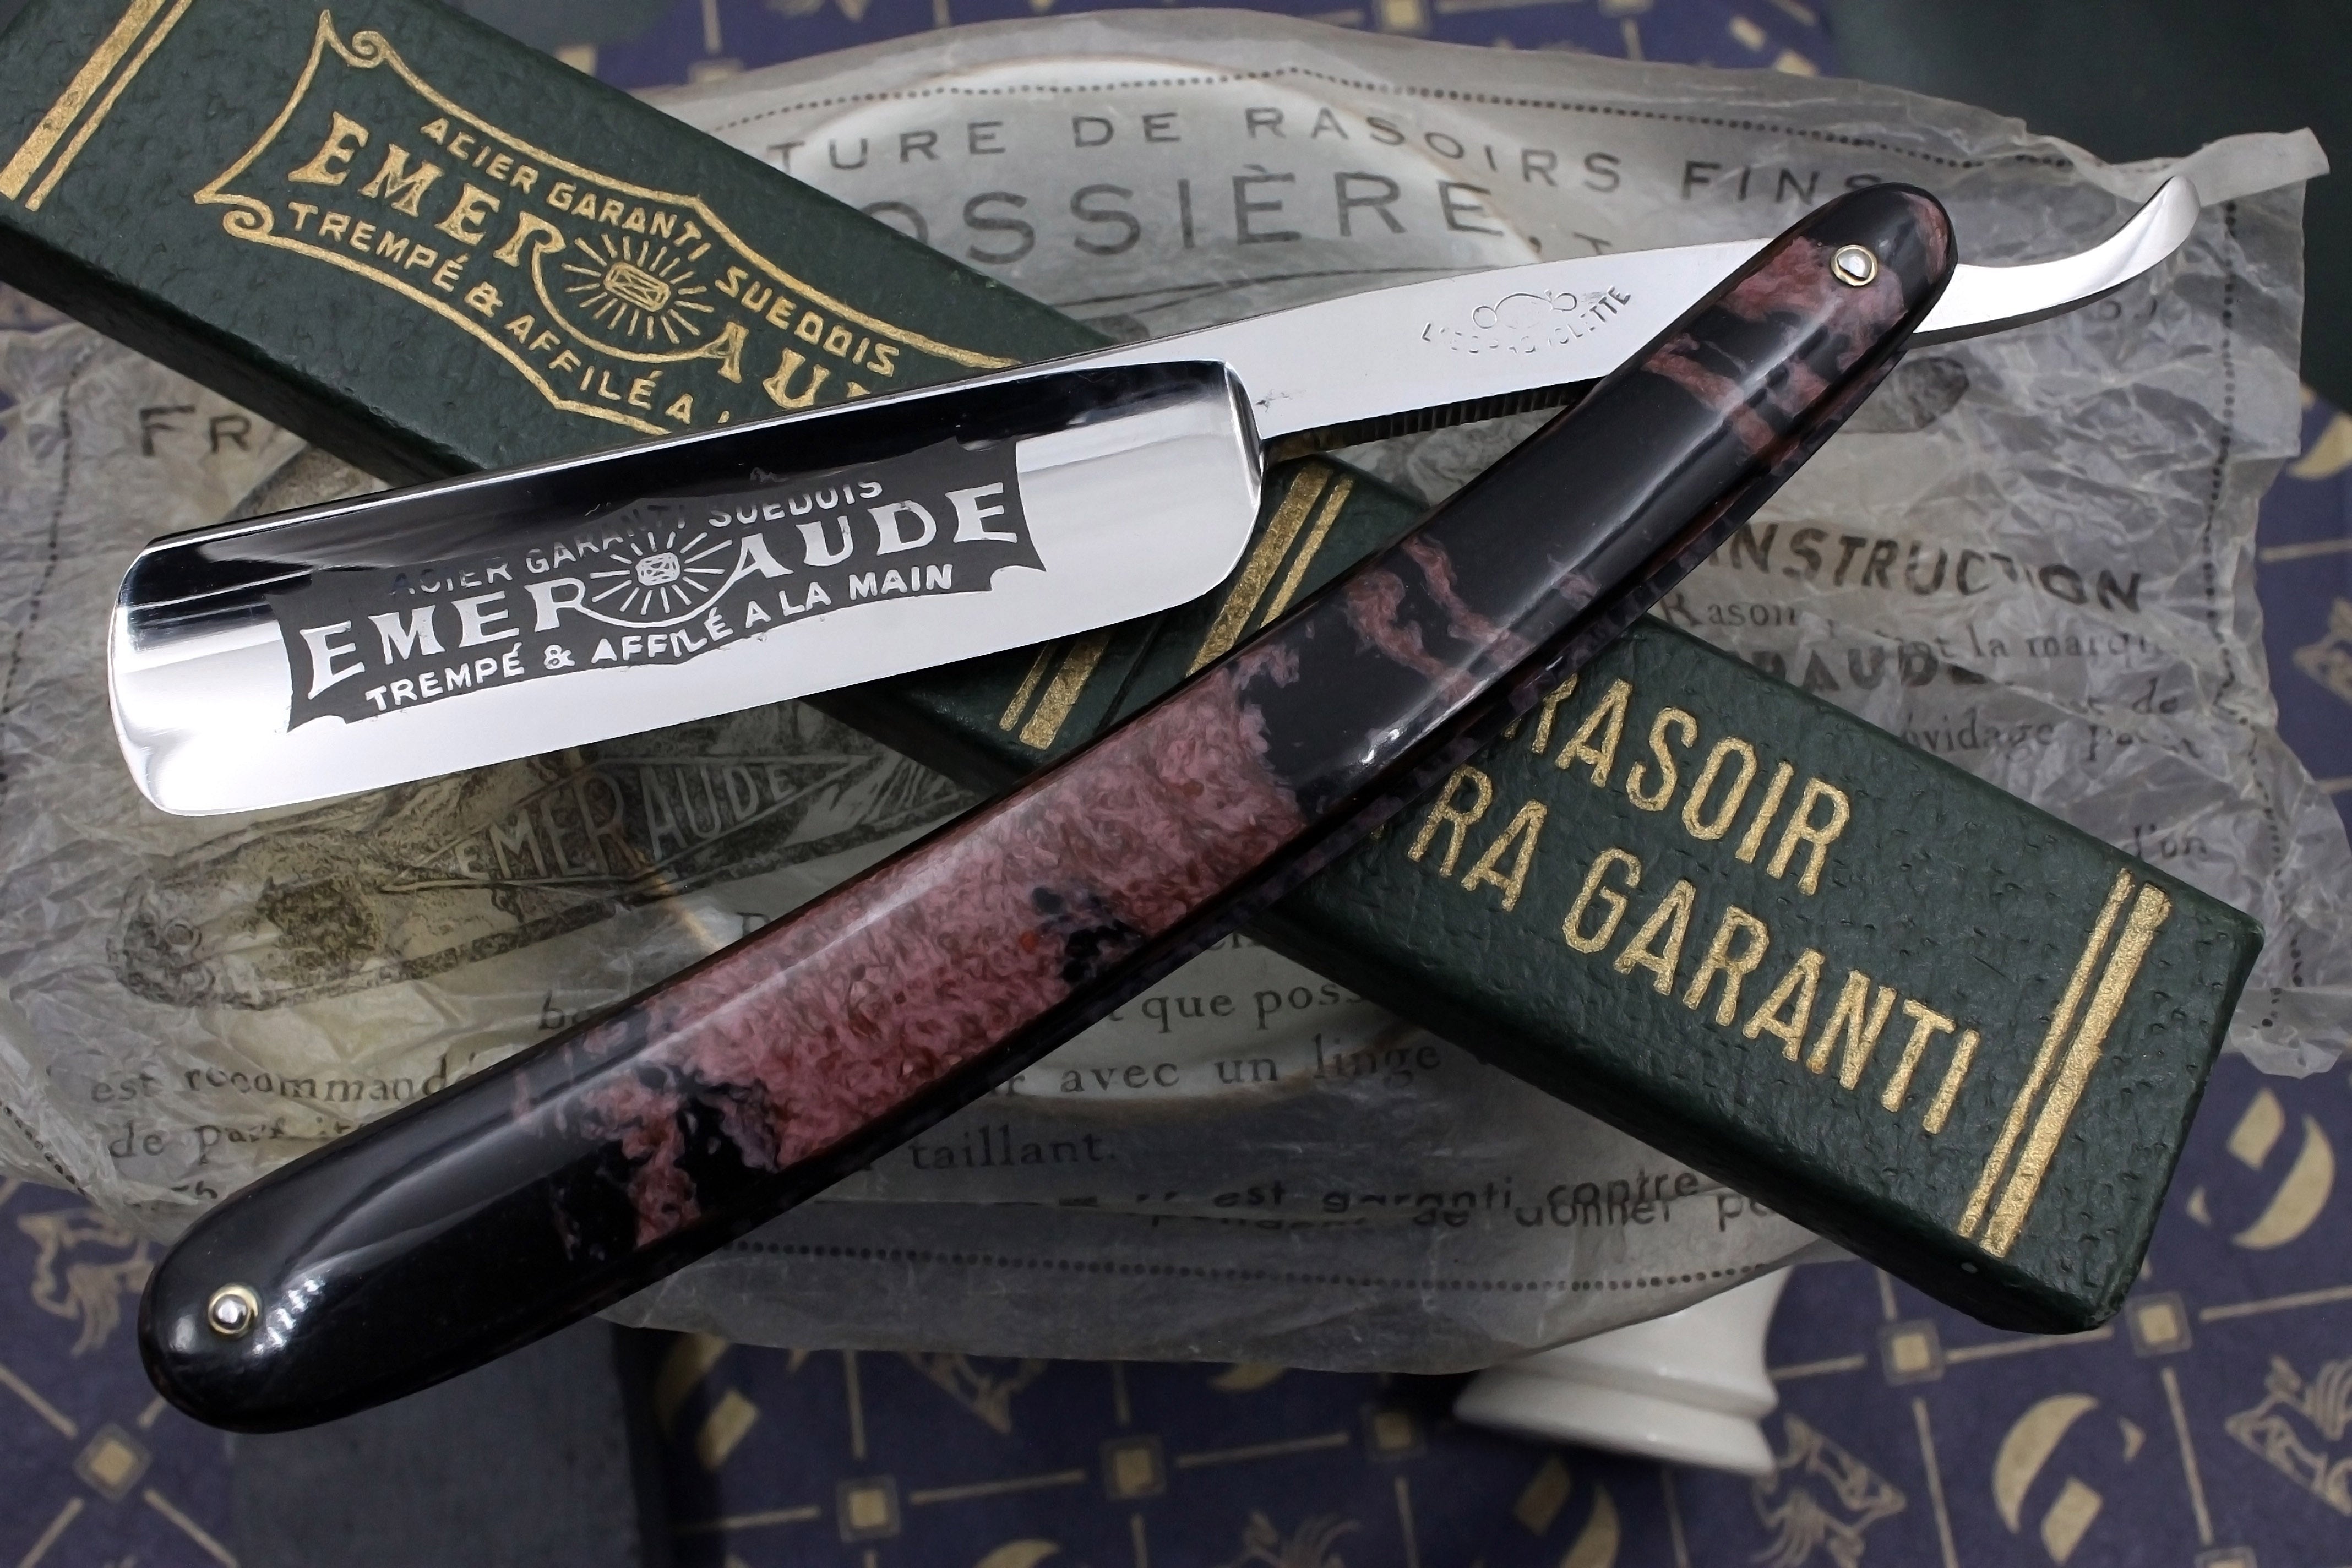 EMERAUDE ESPAGNOLETTE - Like New NOS? 13/16 Full Hollow Blade - Vintage French Straight Razor - Shave Ready